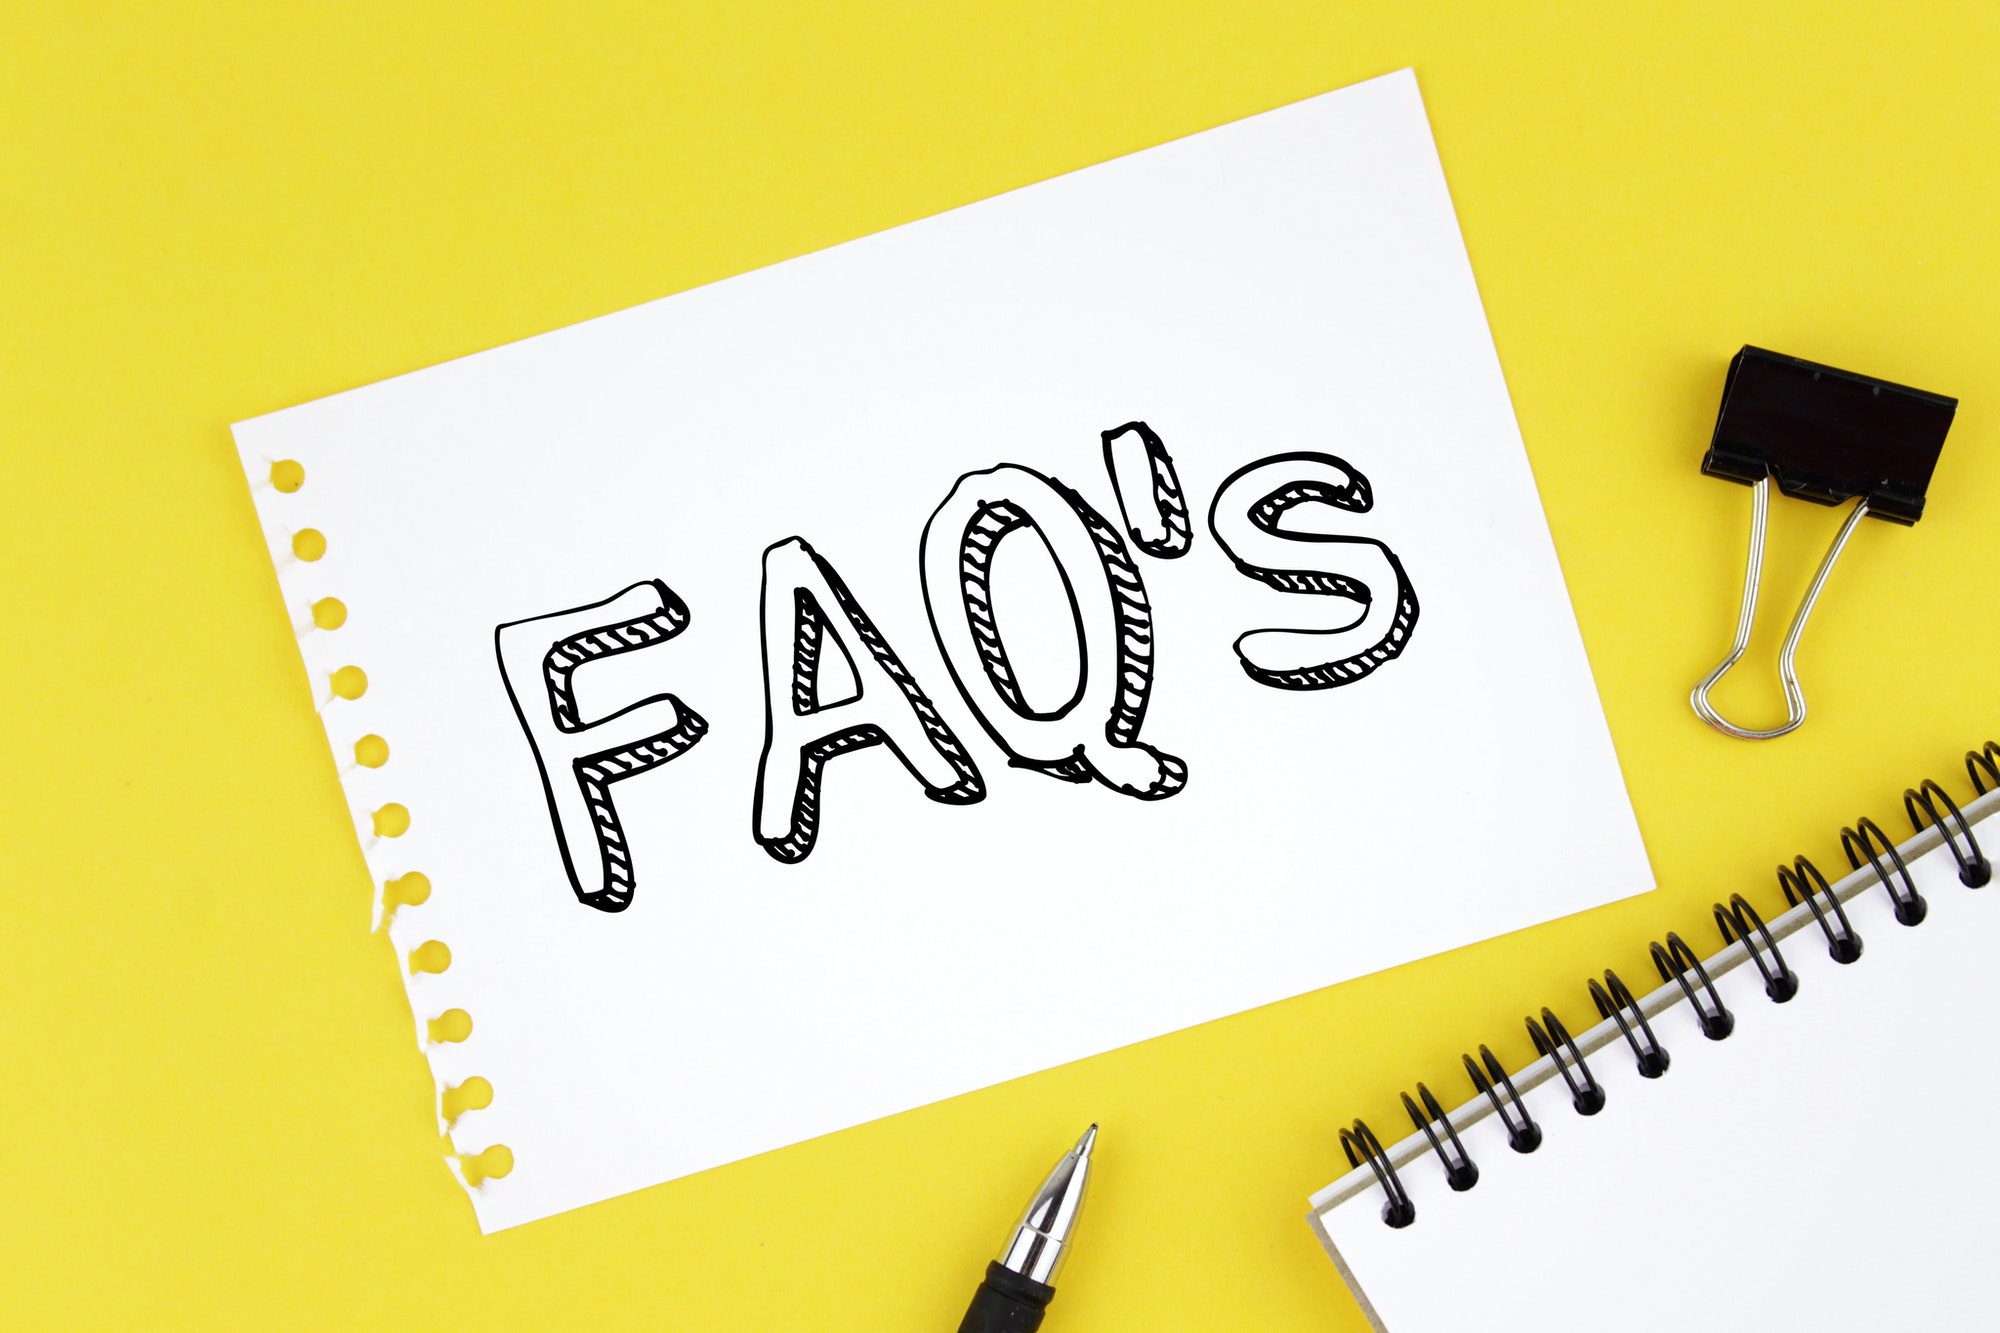 the letters FAQ's standing for frequently asked questions about medicare.